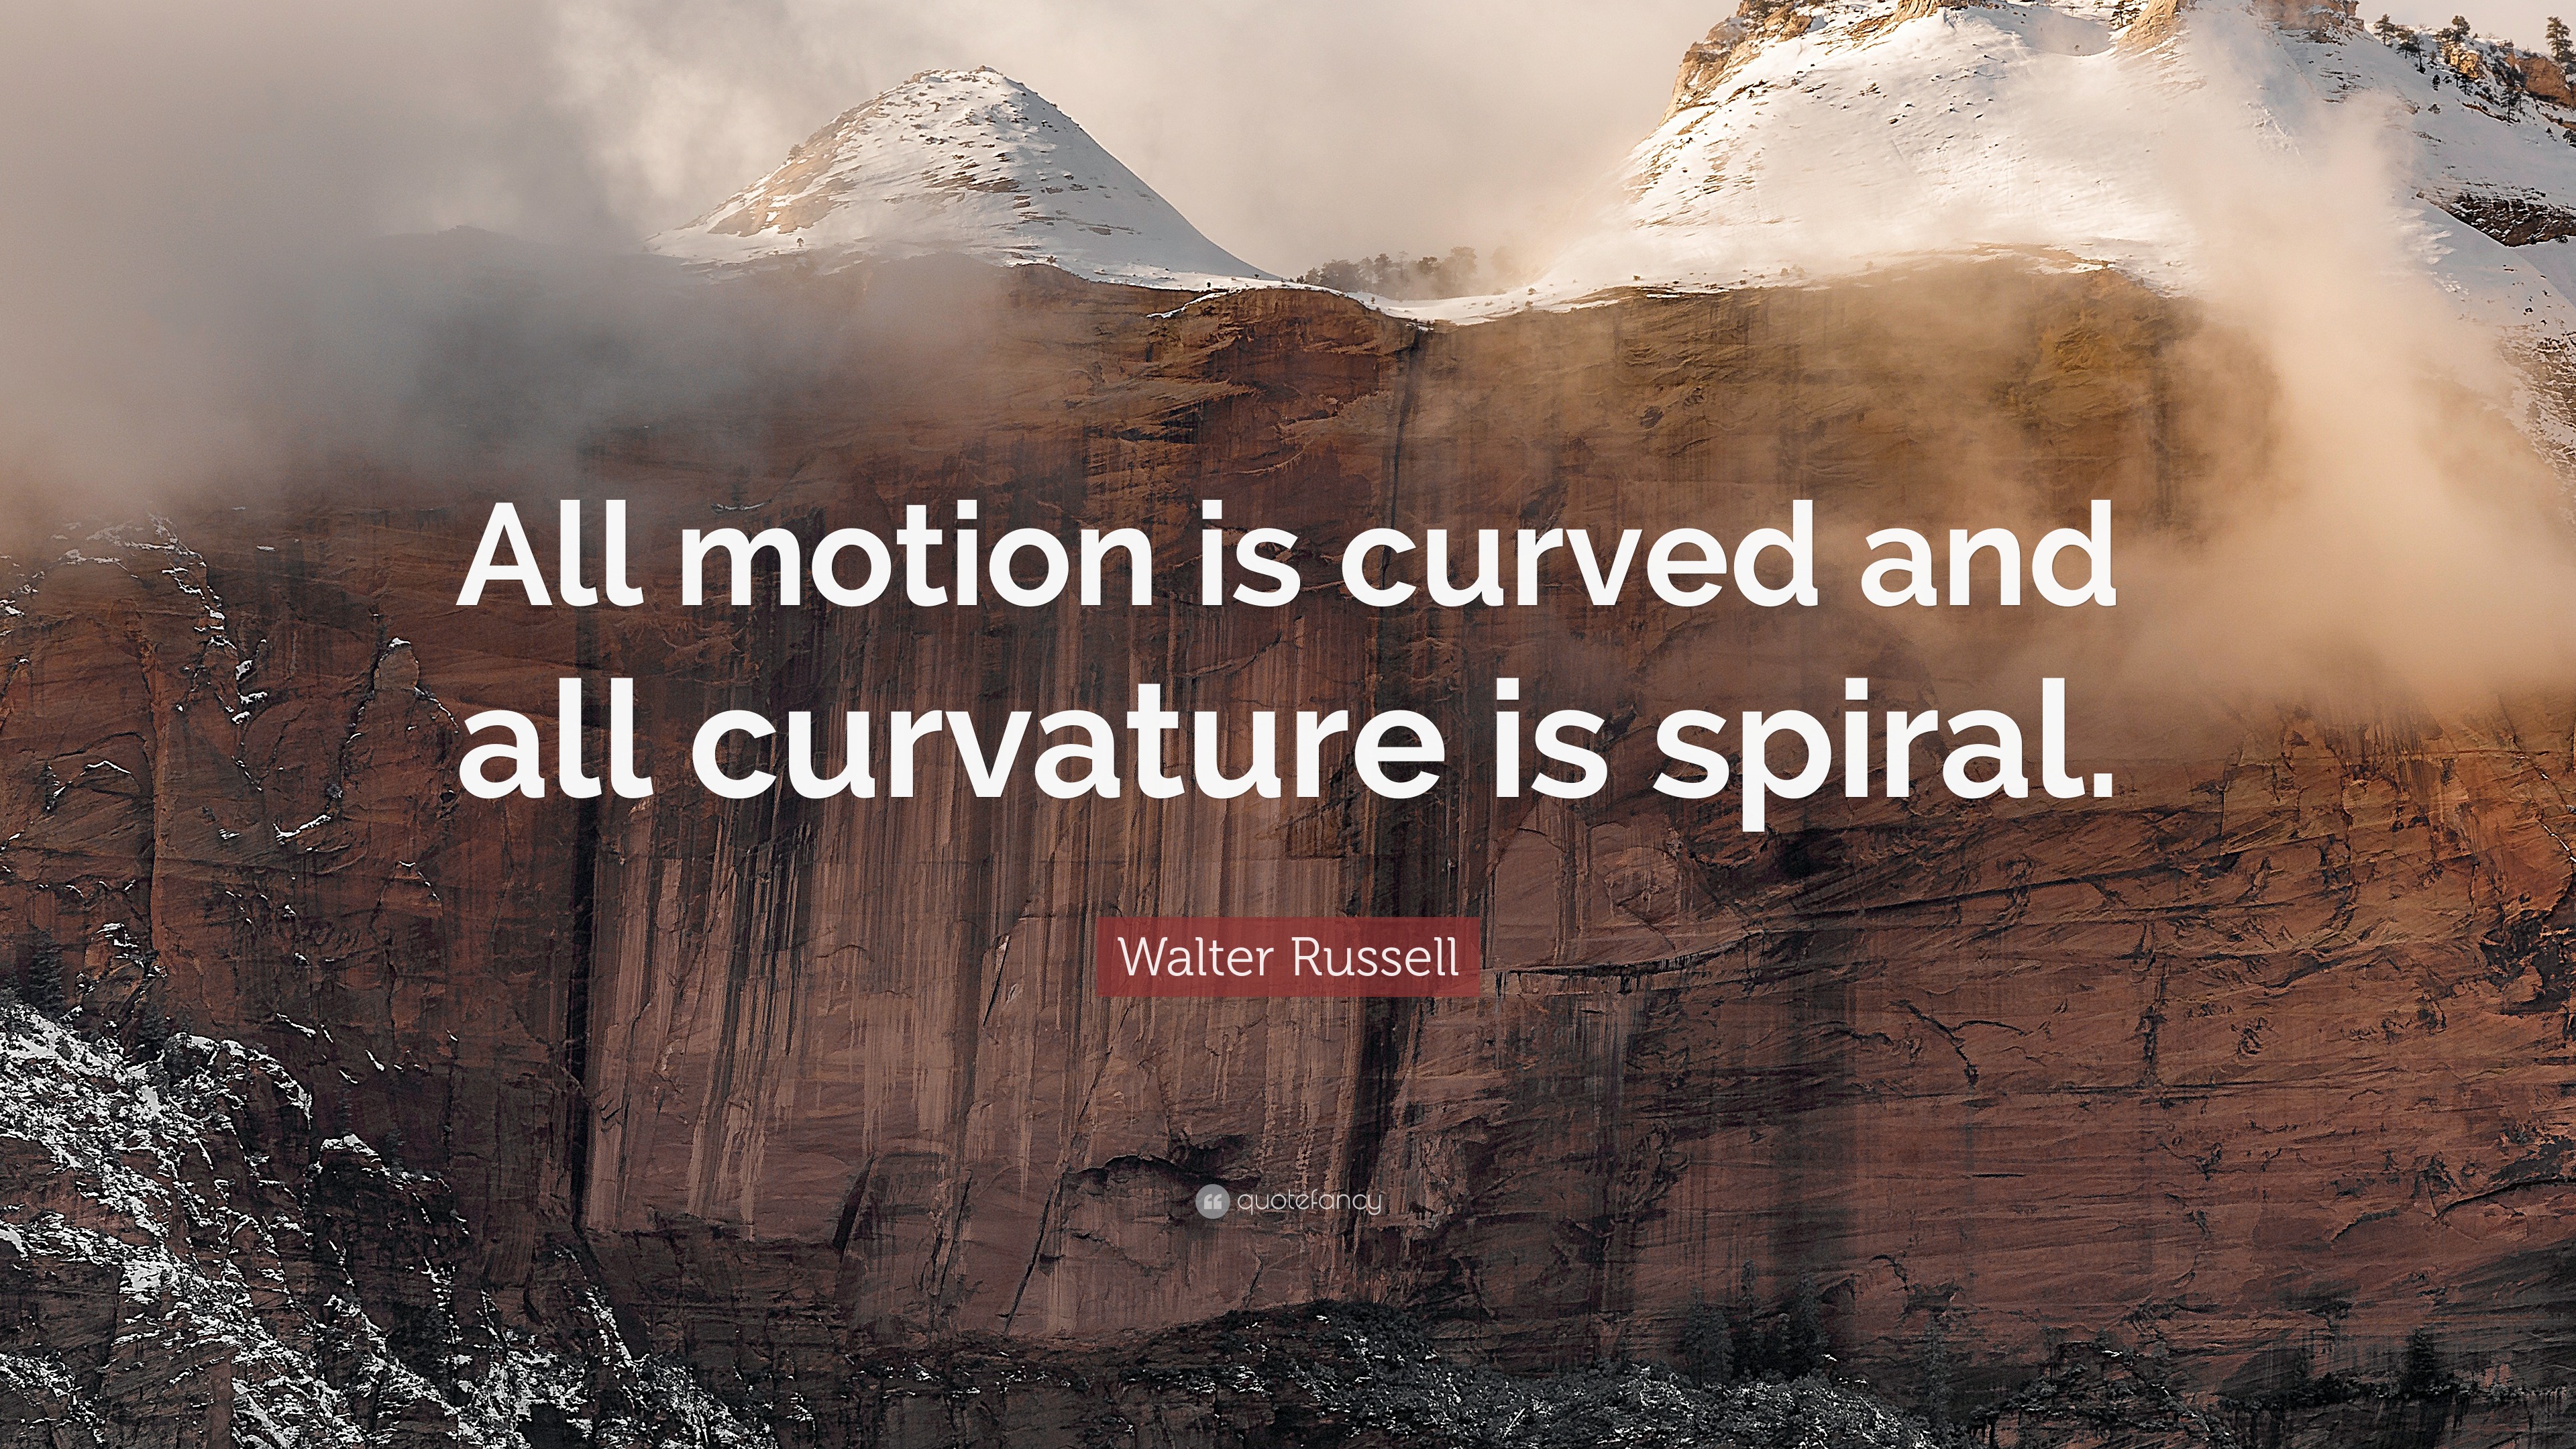 All Motion is Curved and All Curvature is Spiral - Walter Russell